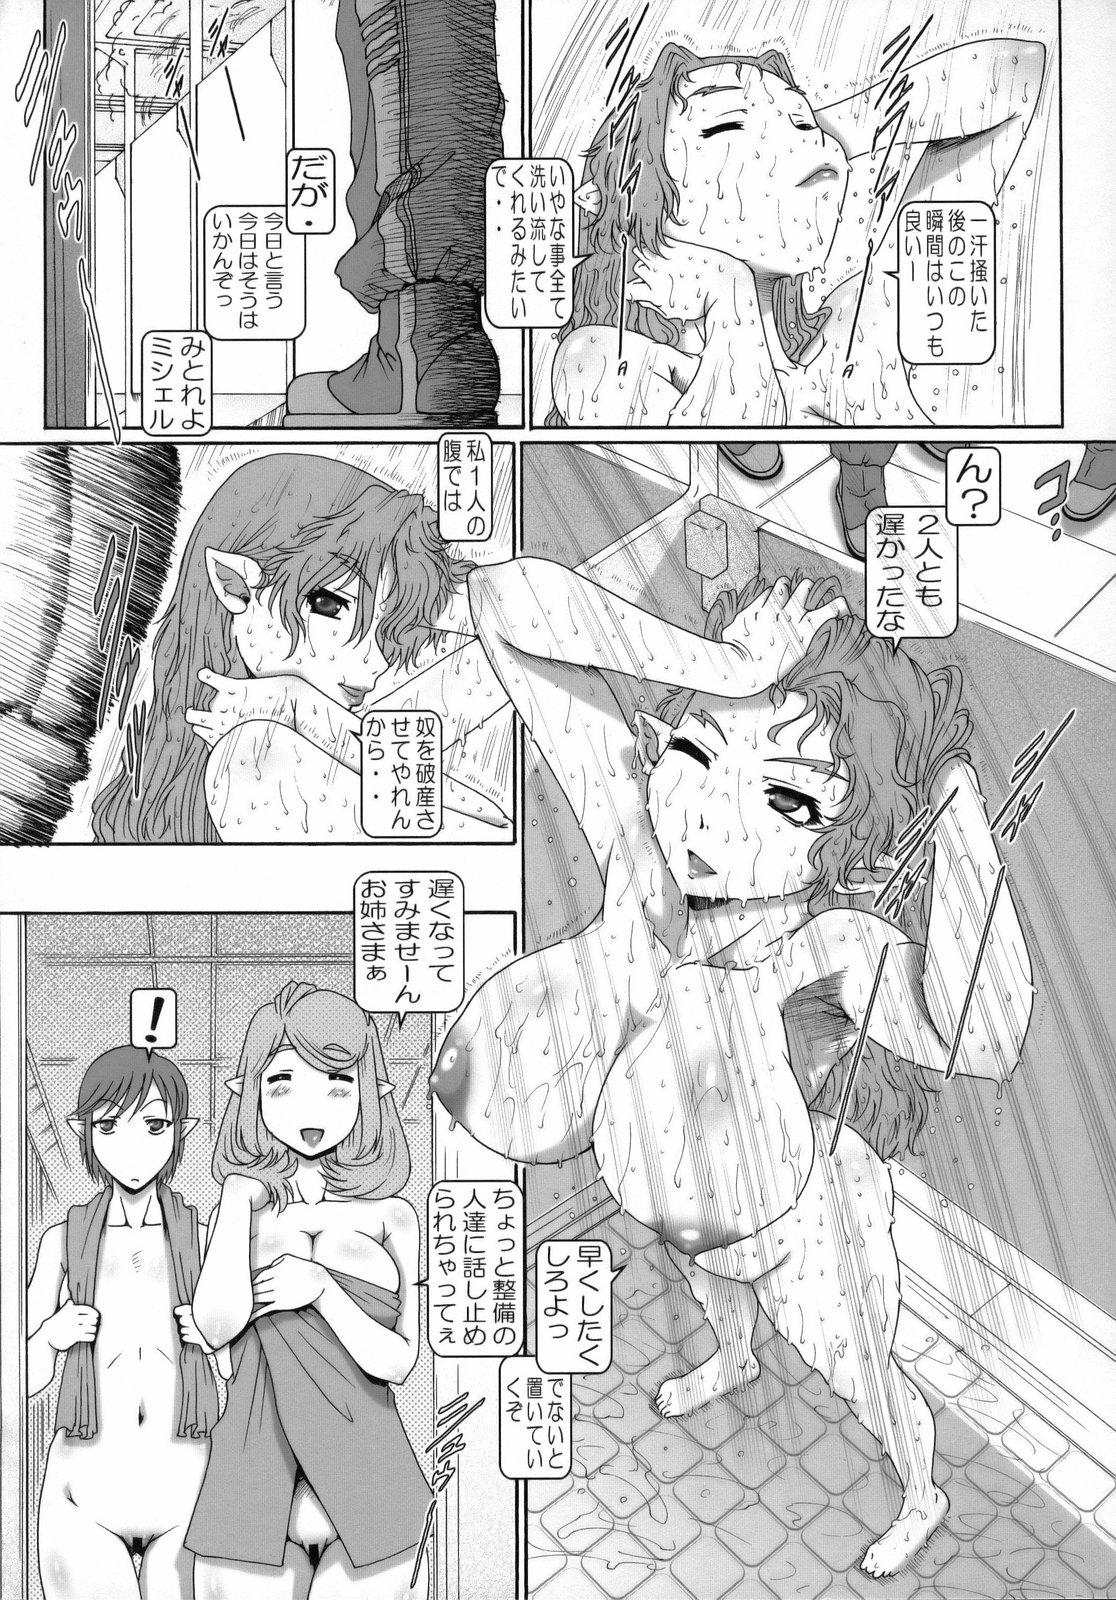 Ink PUCHI EMPIRE 2008 SUMMER - Macross frontier Gag - Page 9